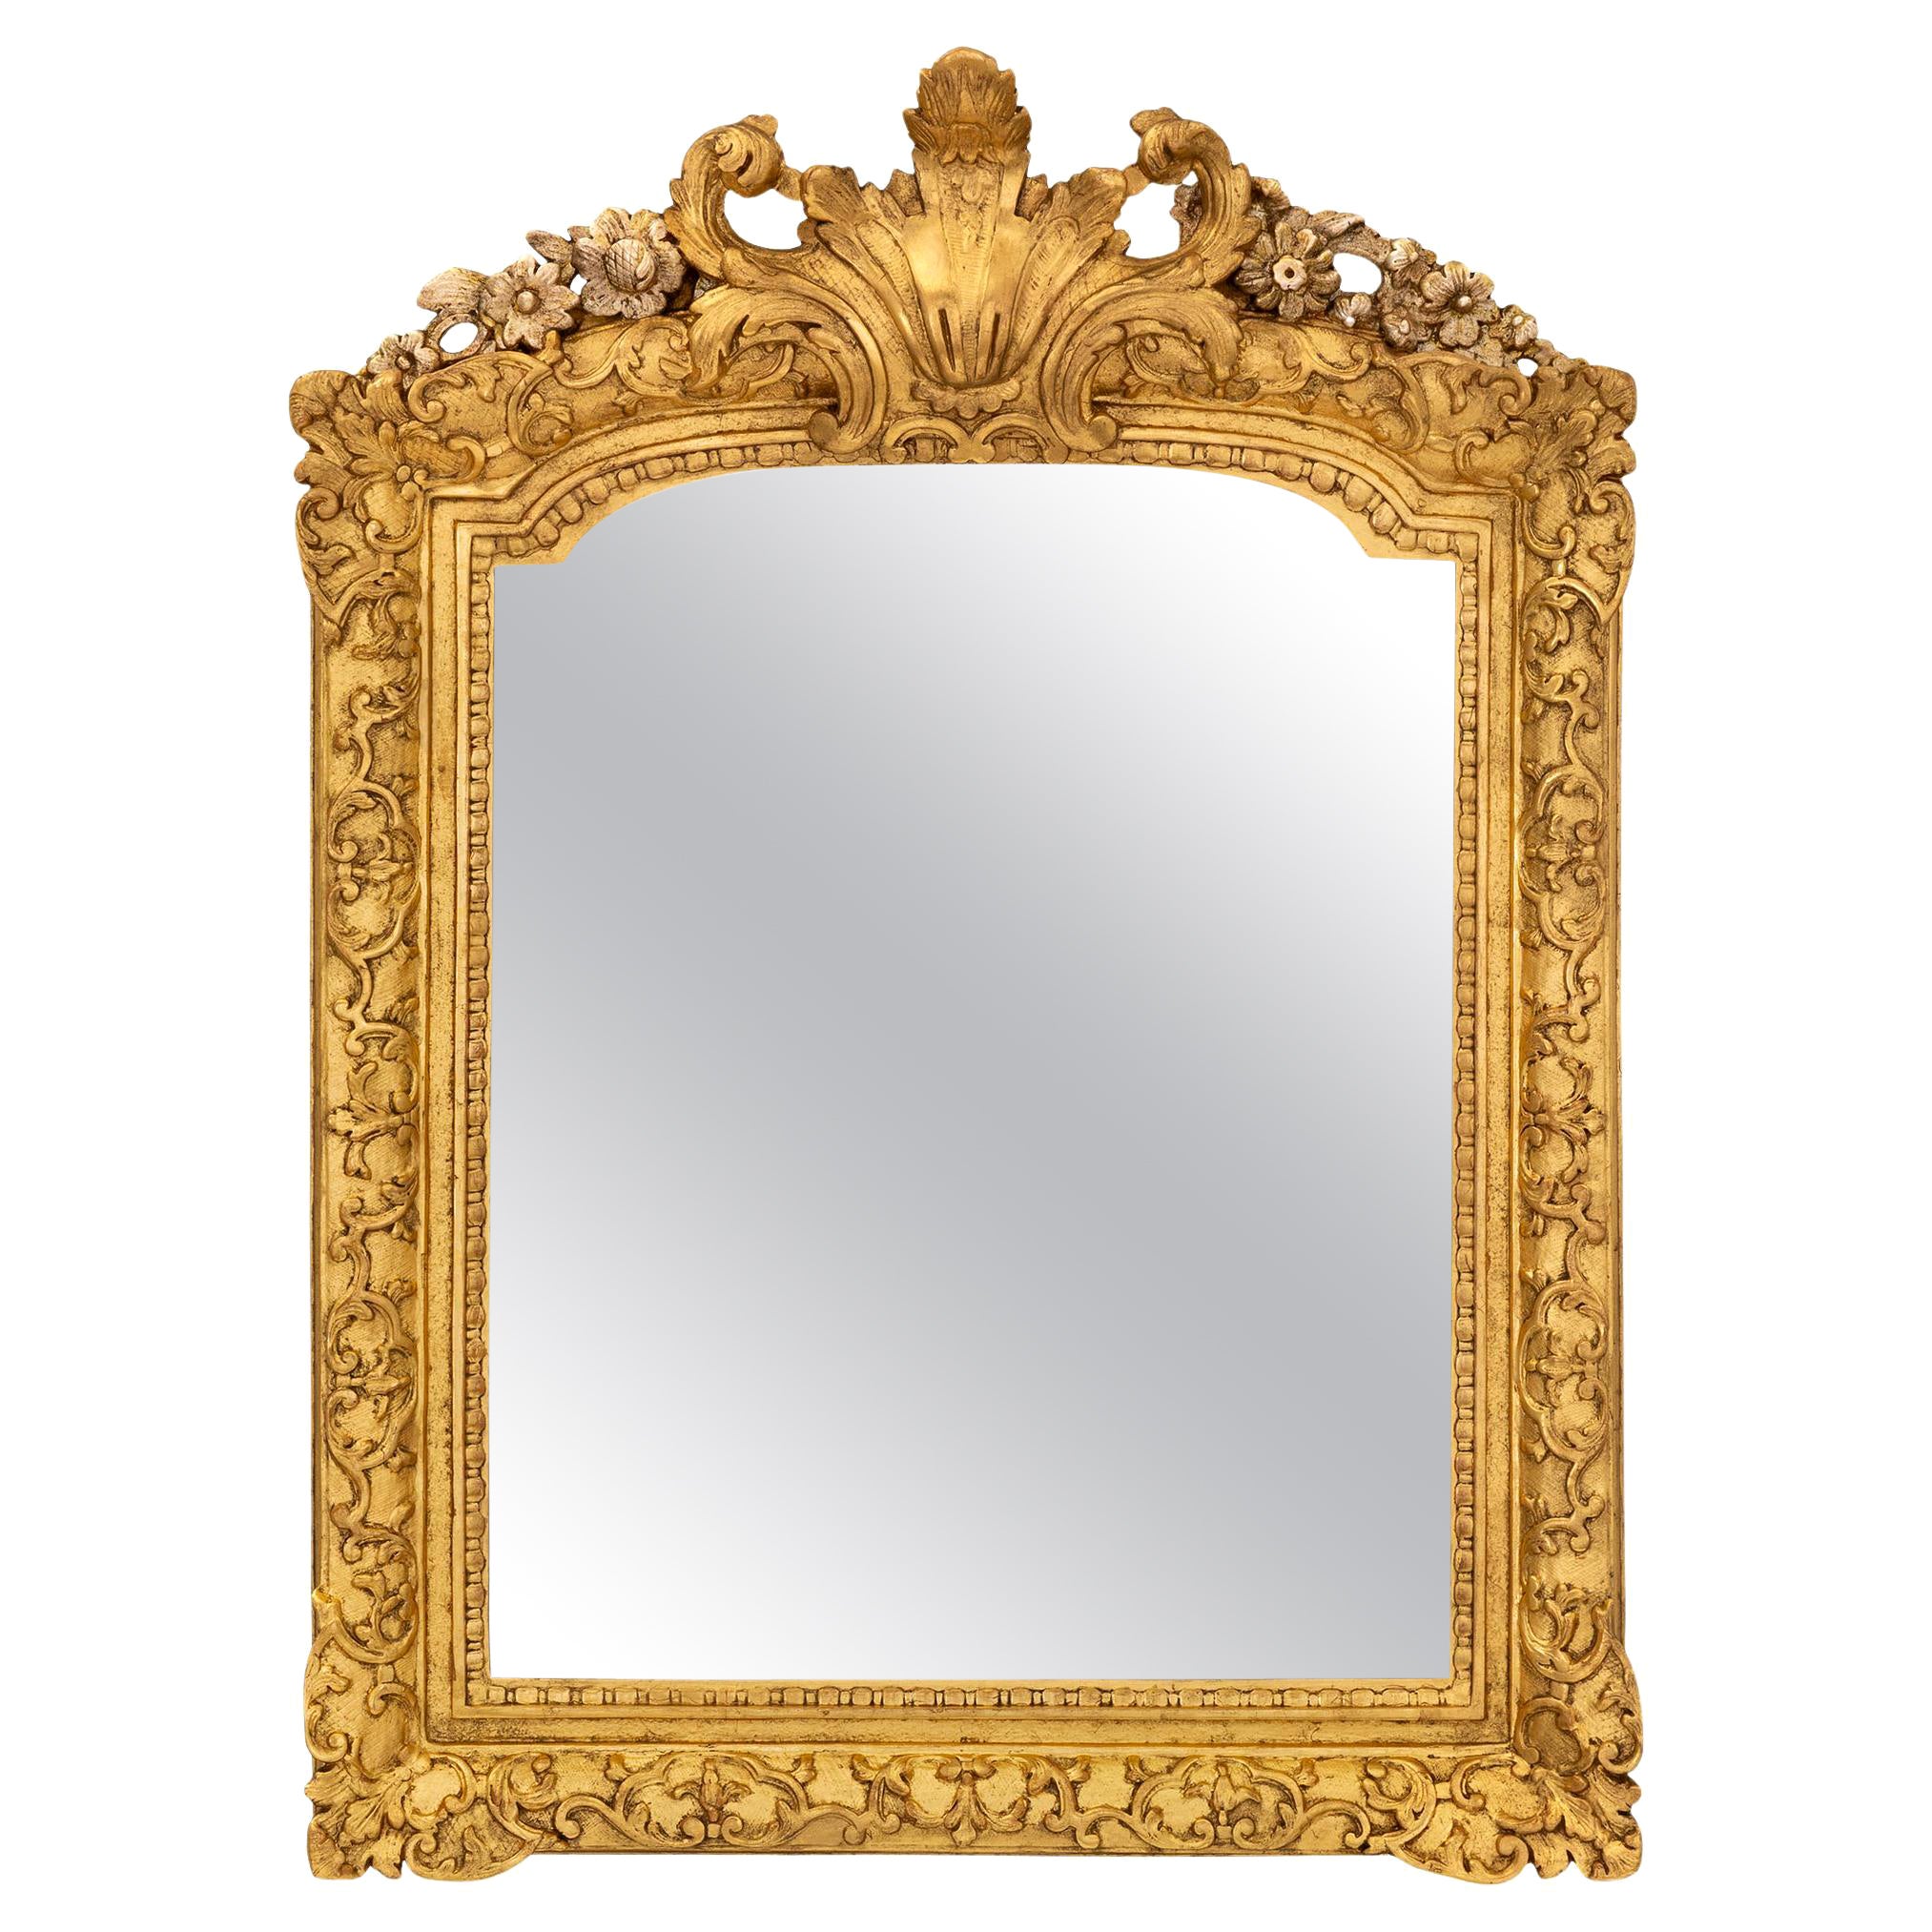 French Early 18th Century Régence Period Giltwood and Mecca Mirror